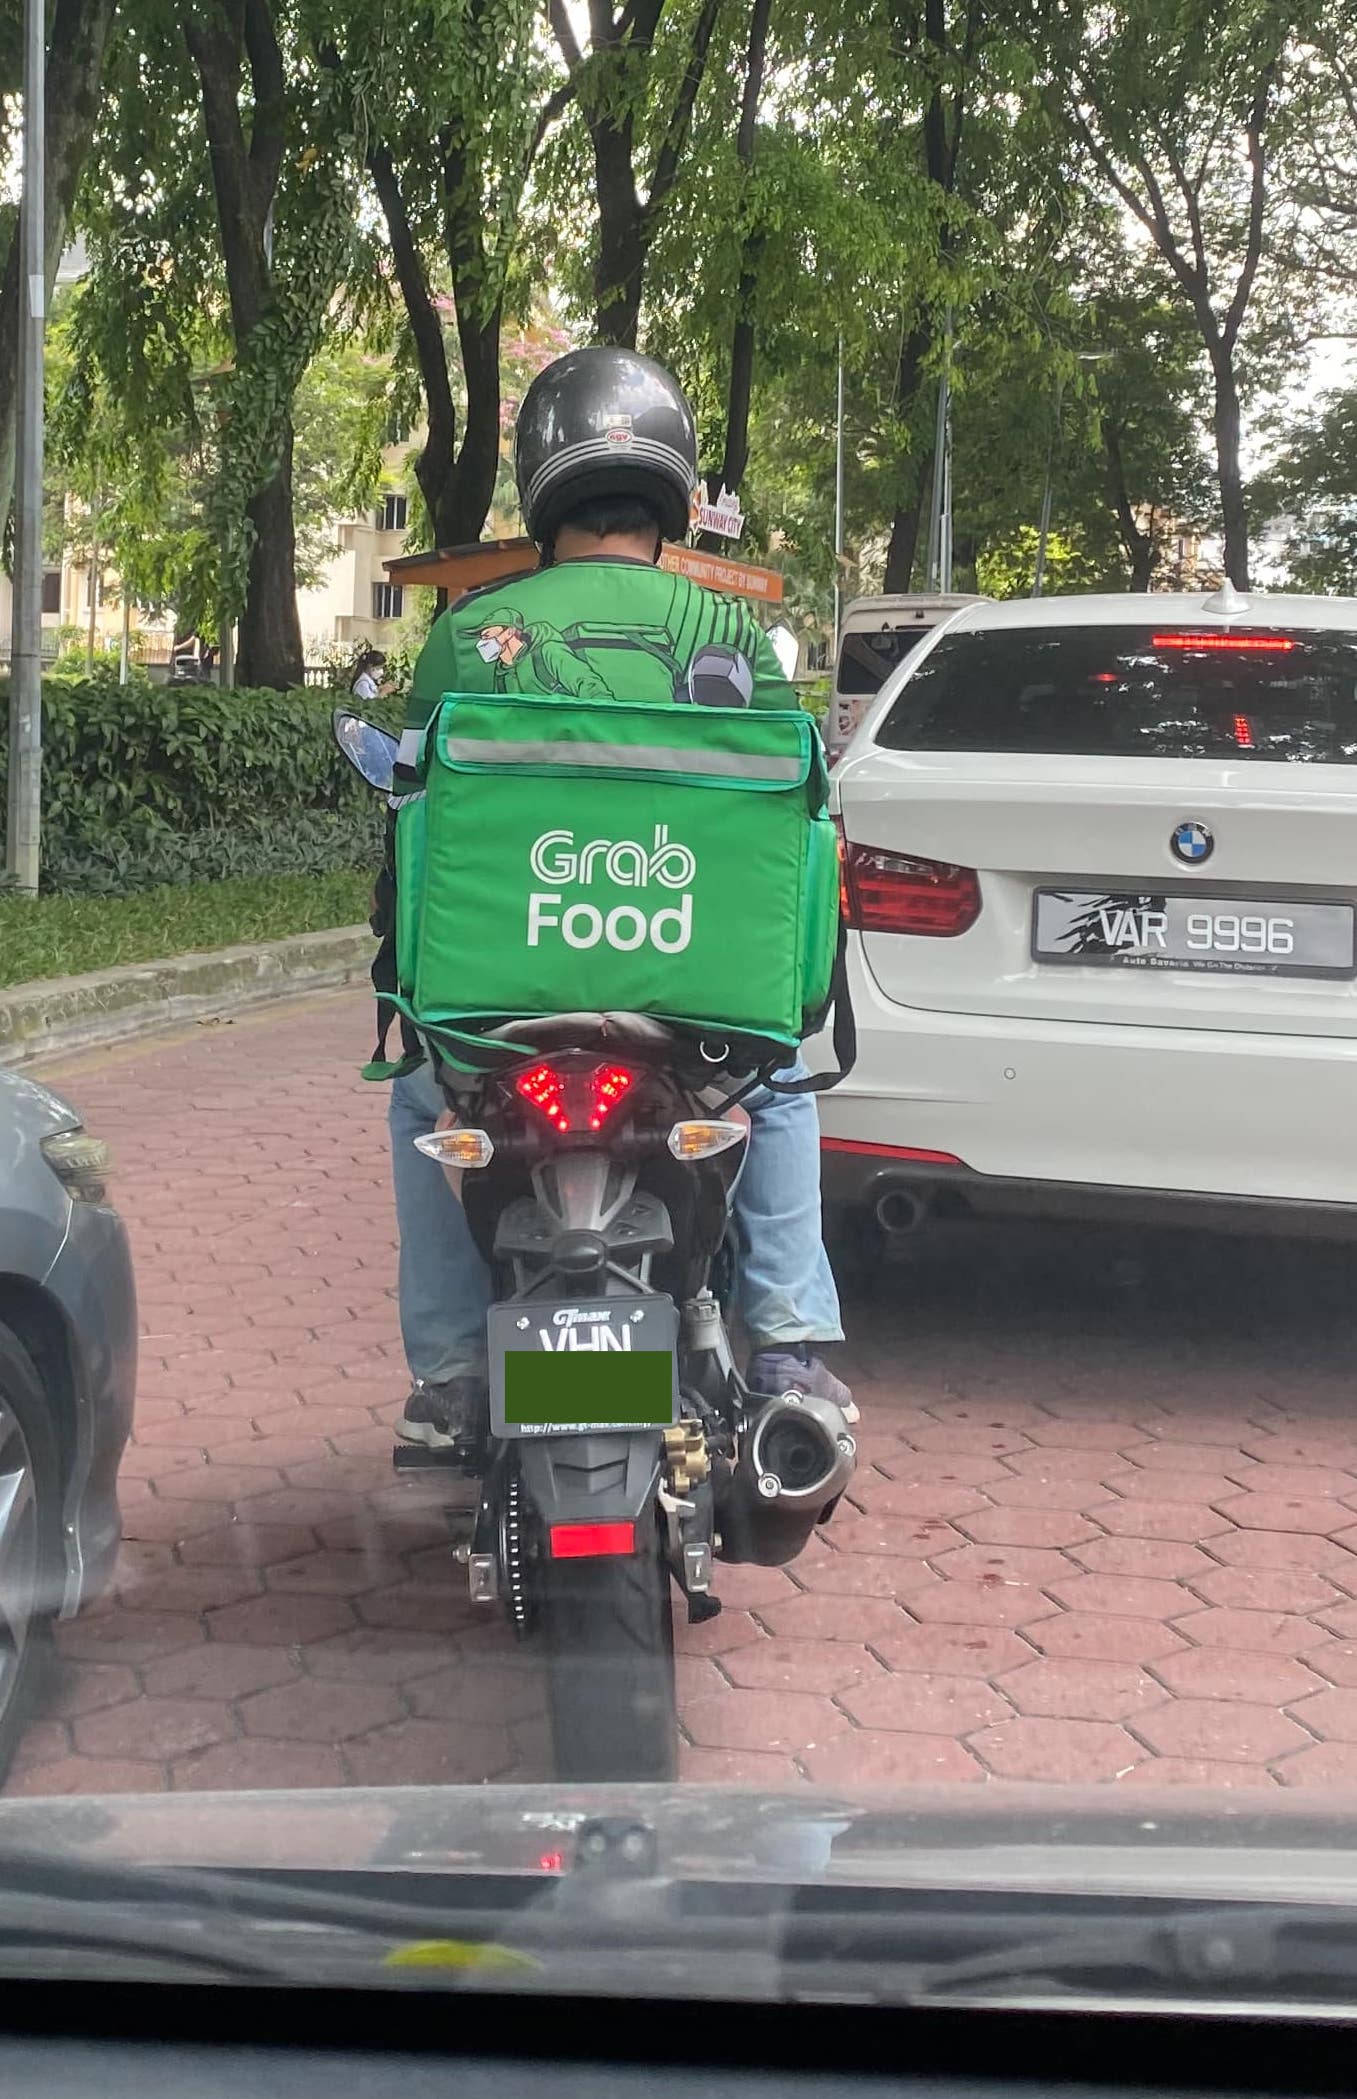 Grab Announces Lay Off Of 1,000 Staff In SG, Biggest Ever Since The